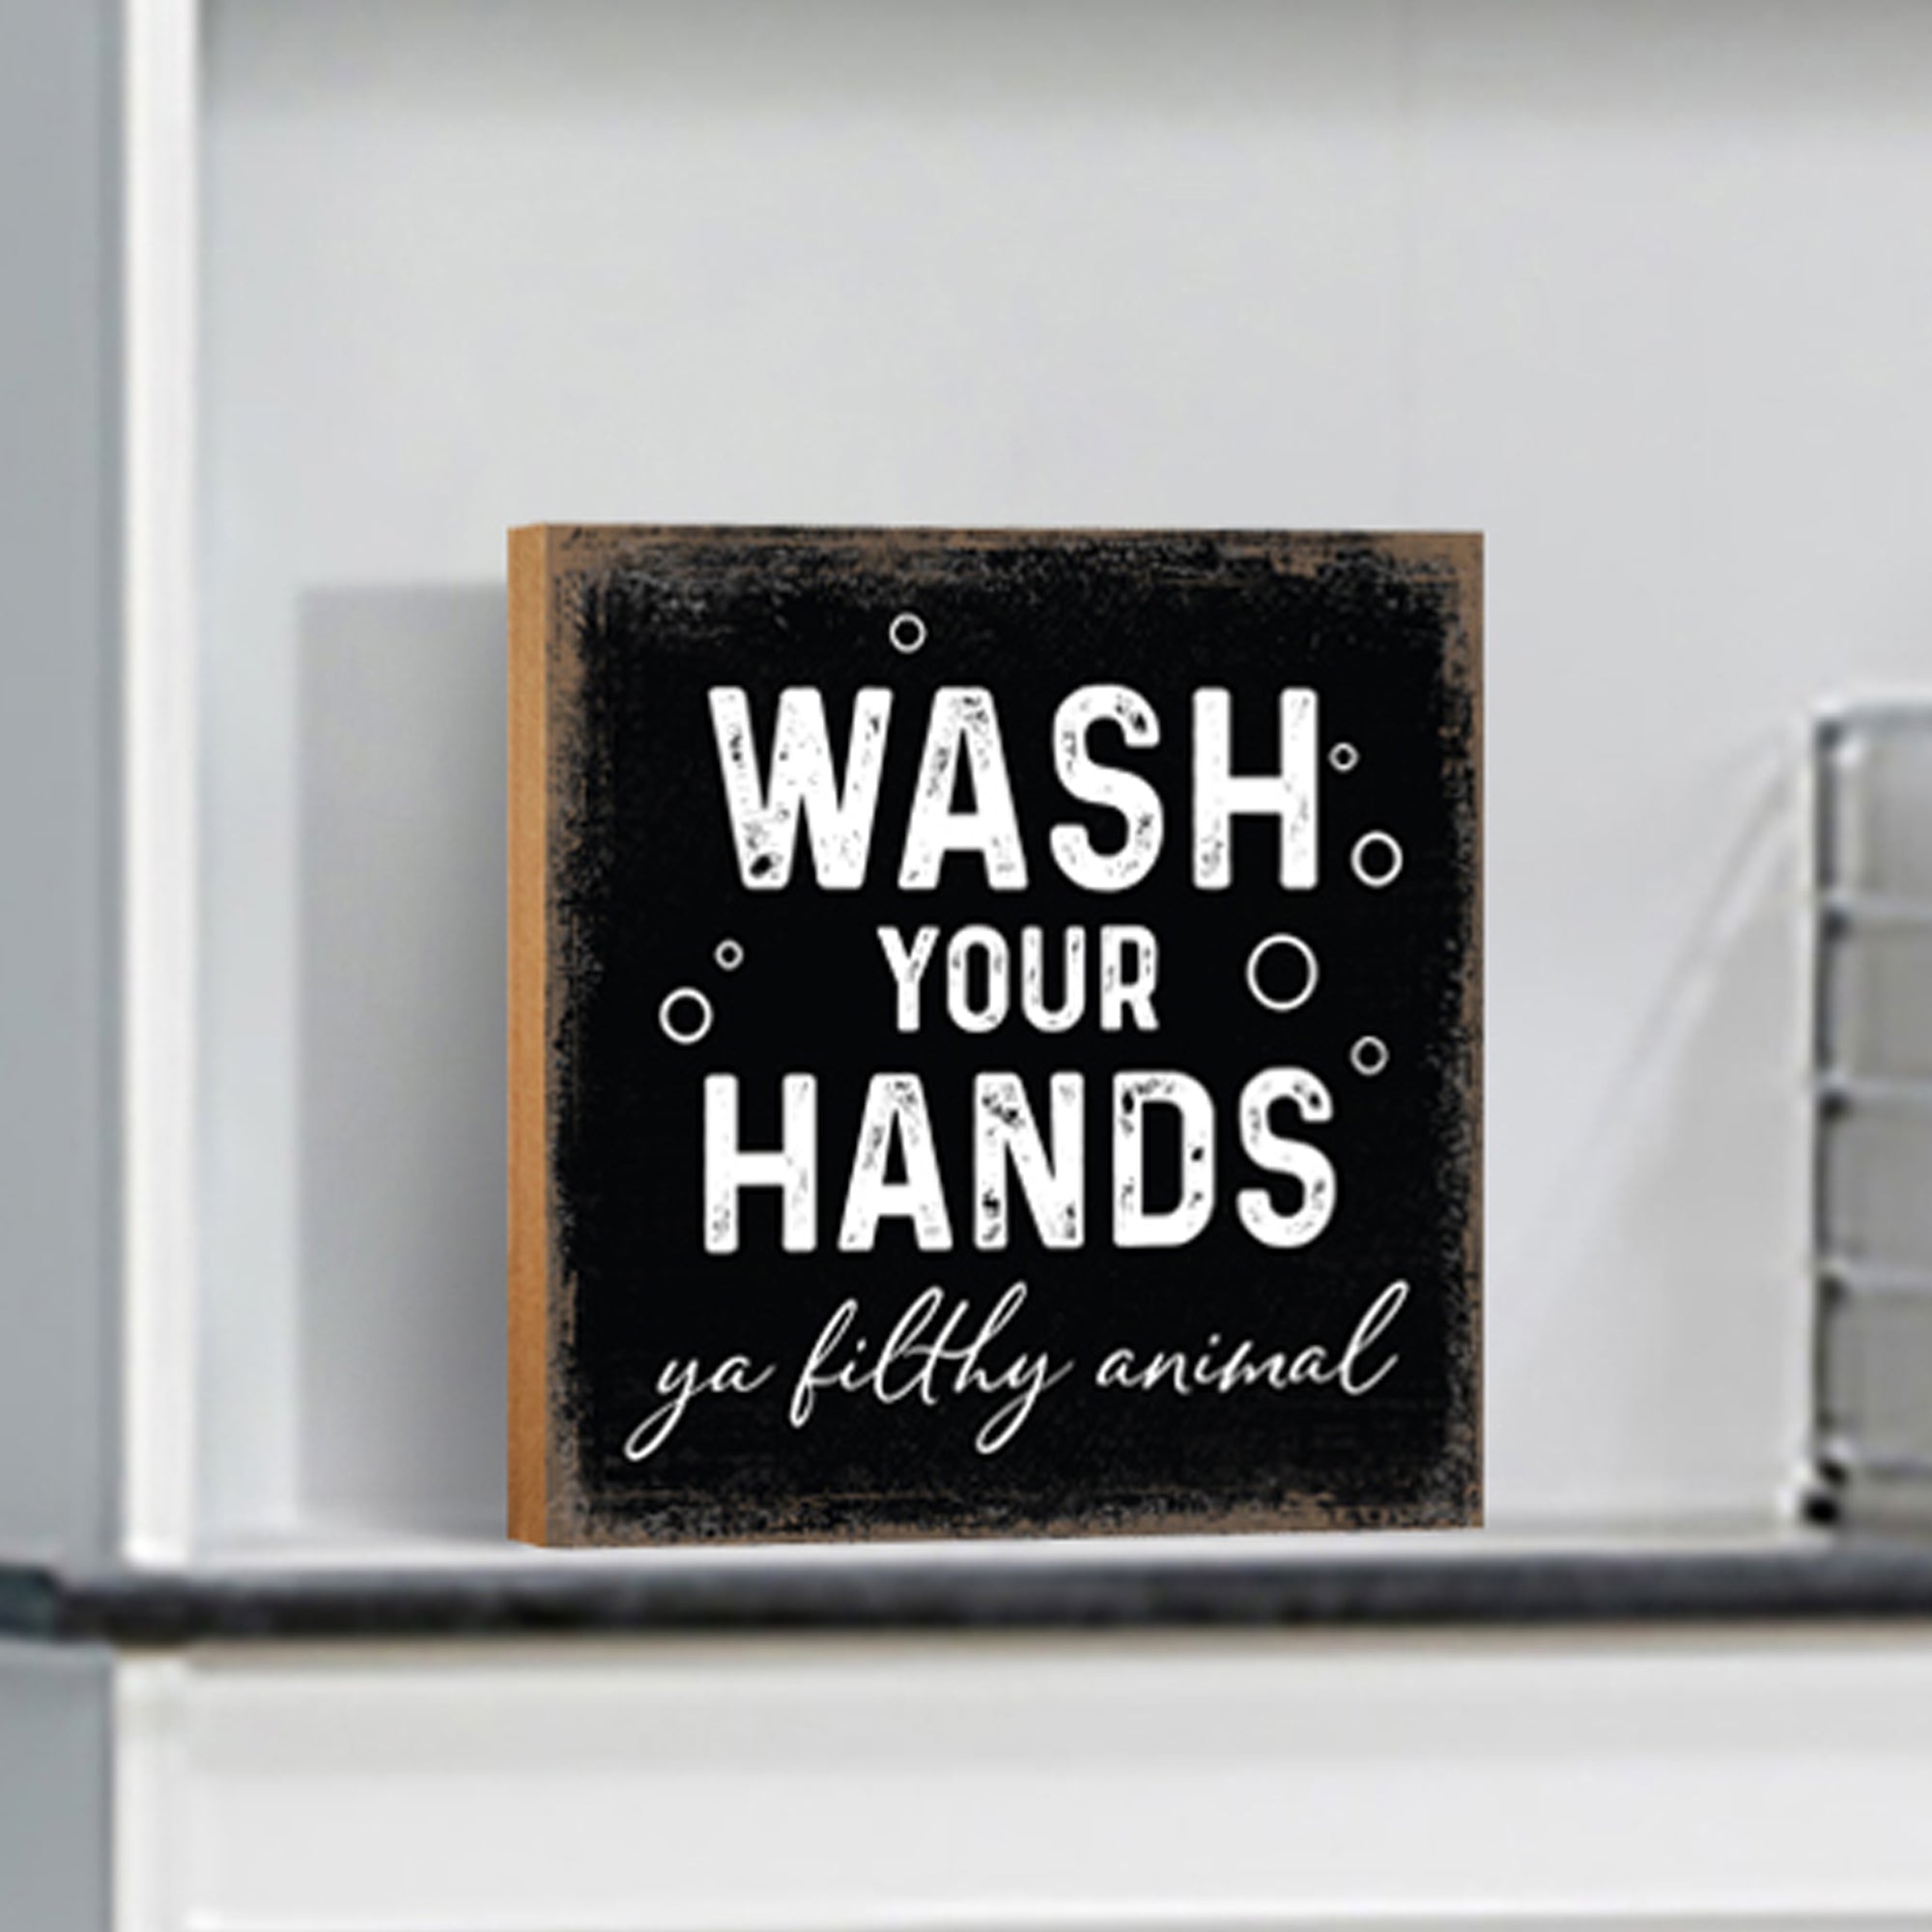 Wooden BATHROOM 6x6 Block shelf decor (Wash Your Hands) Inspirational Plaque Tabletop and Family Home Decoration